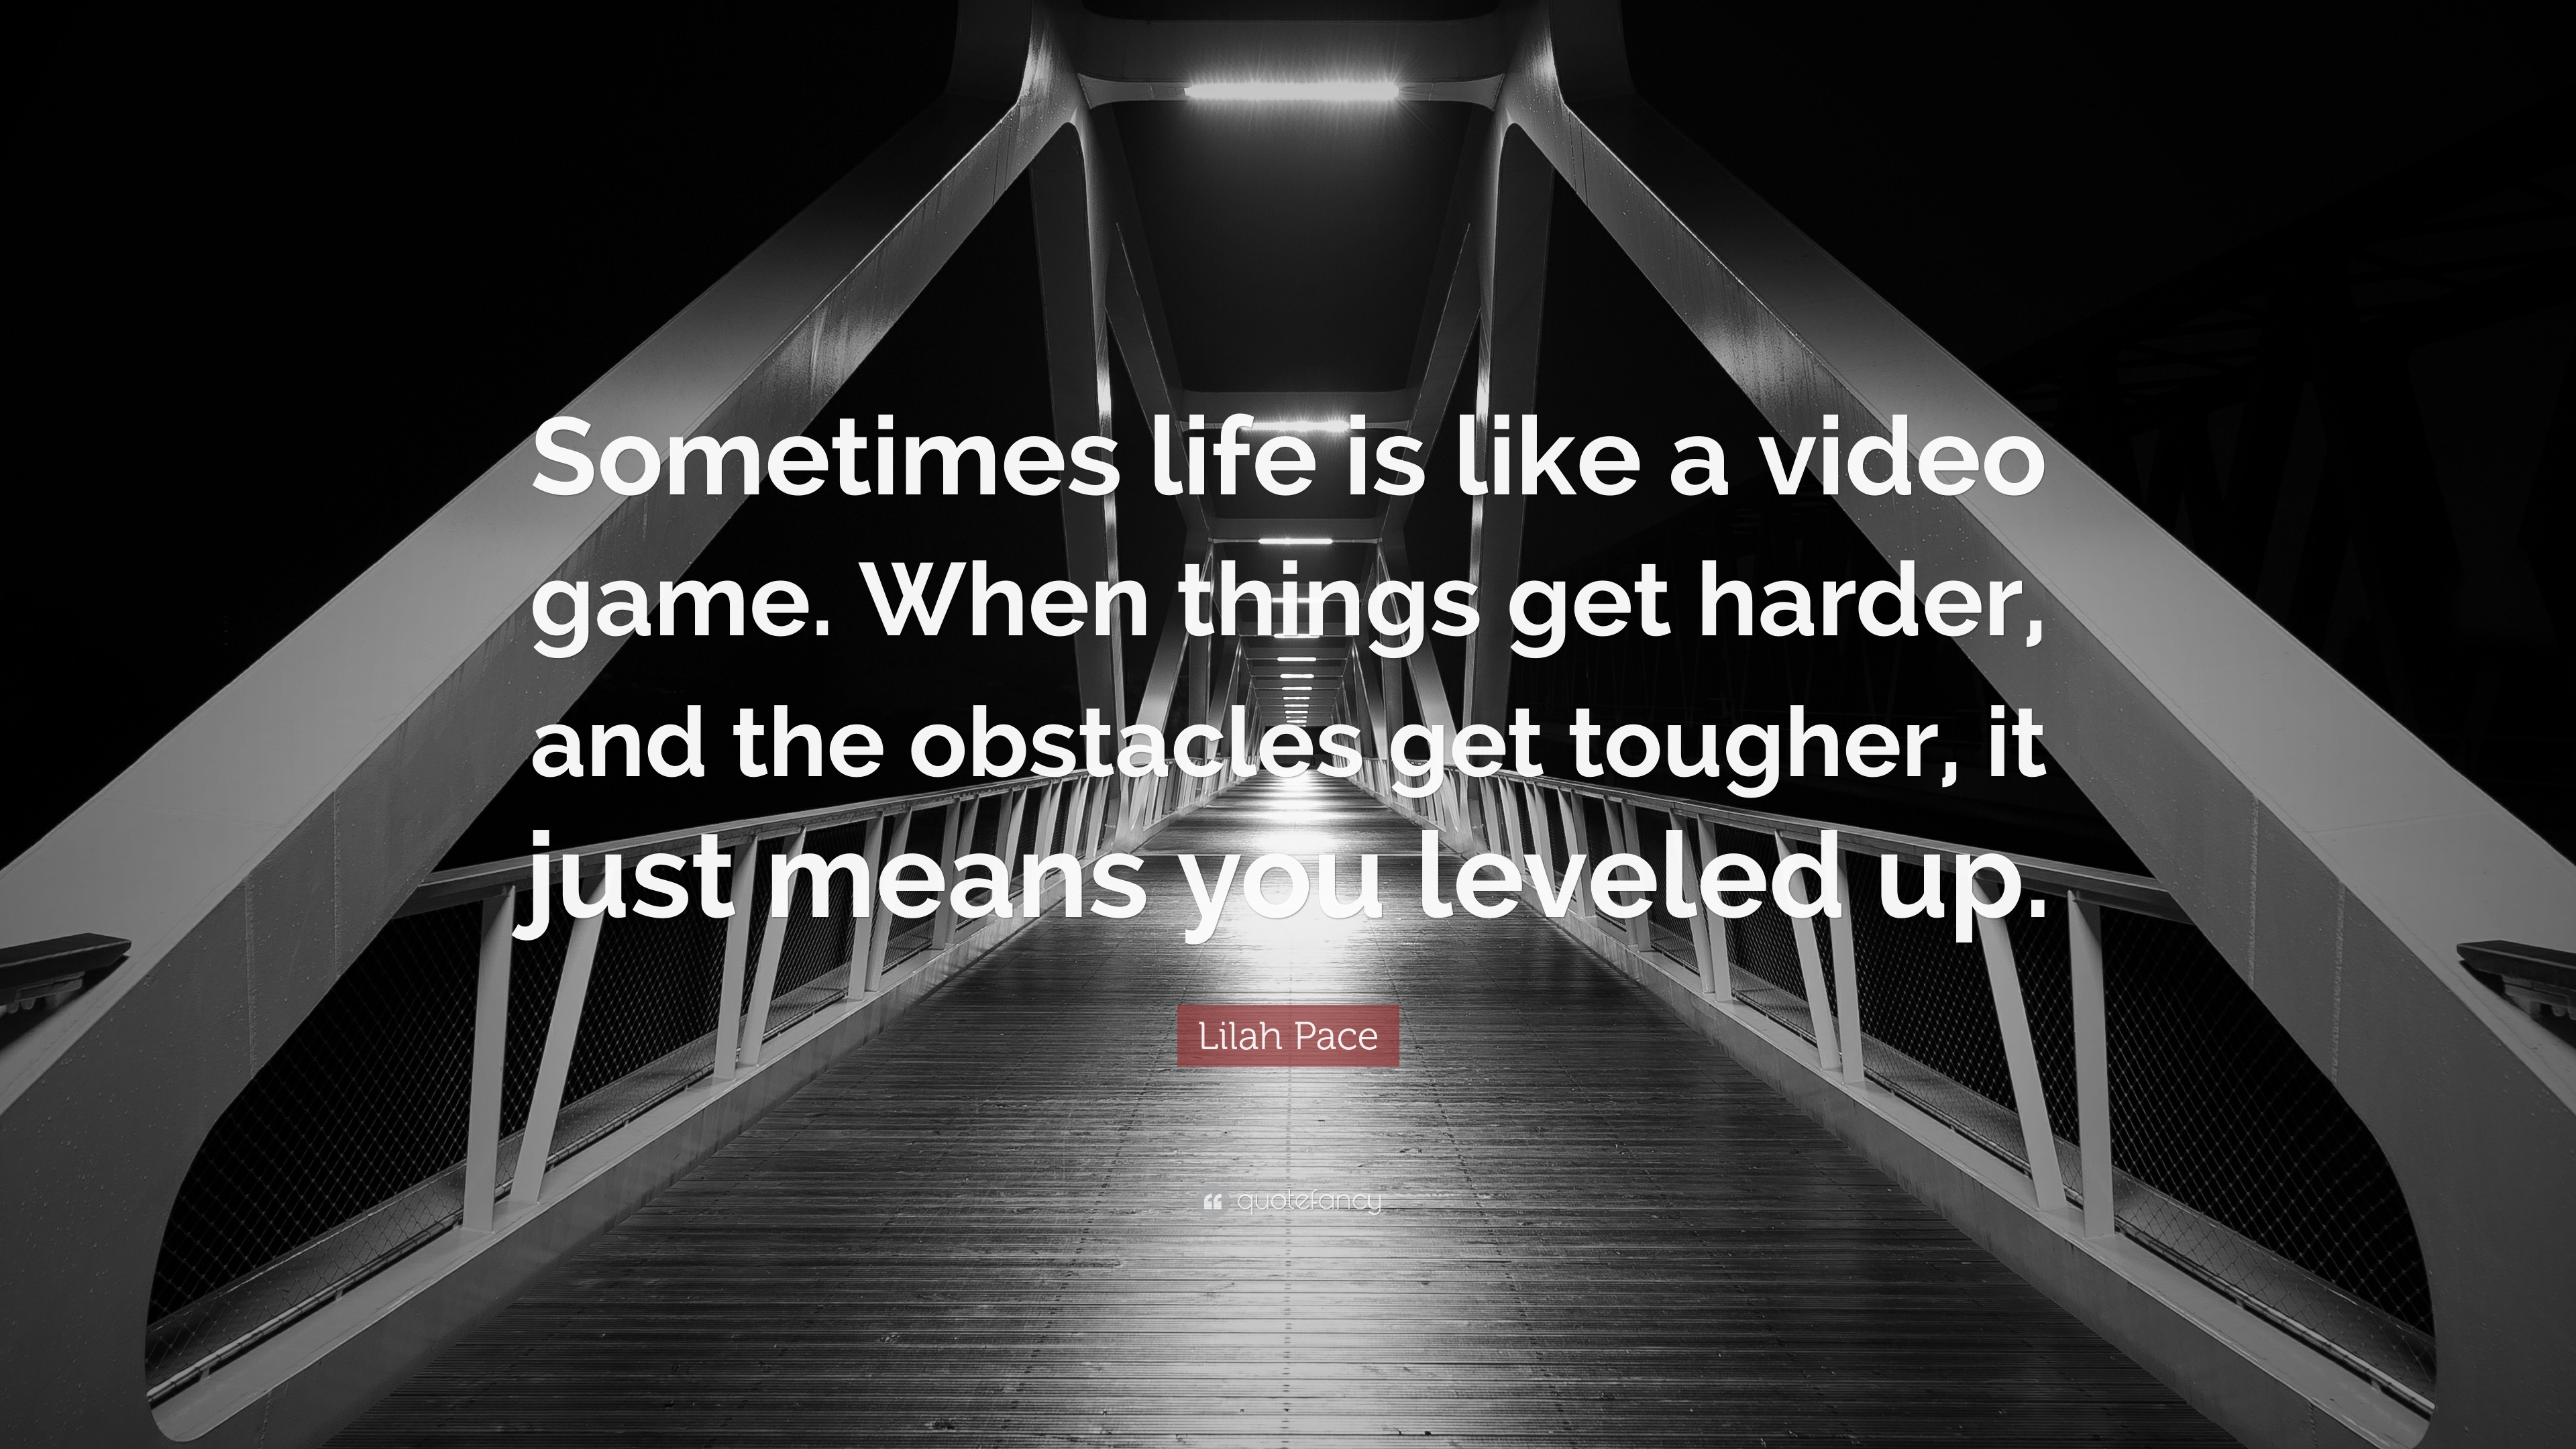 video game quotes about life, Wow! Cool video game quote on life.